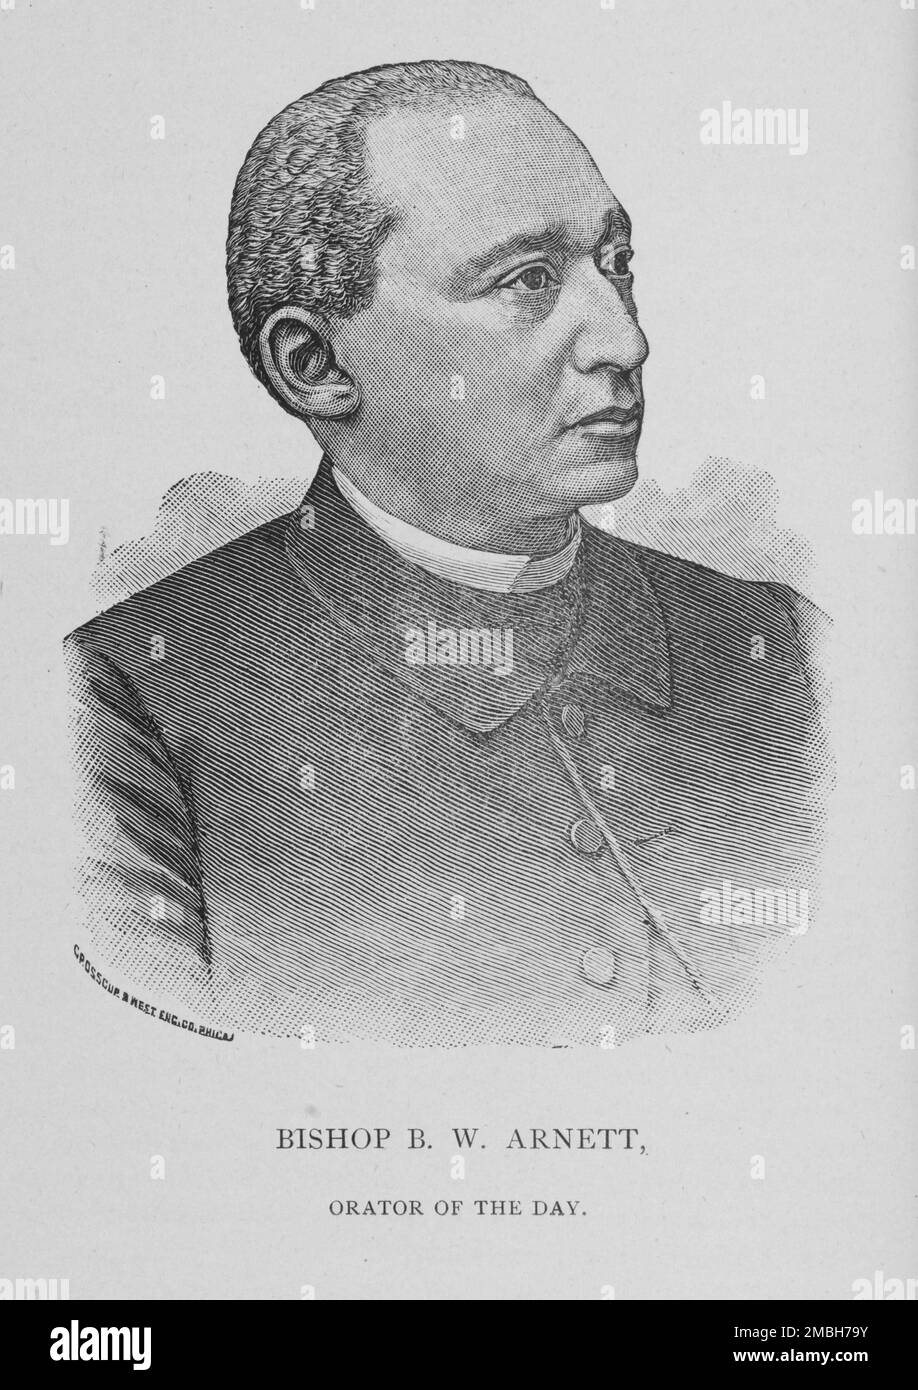 https://c8.alamy.com/comp/2MBH79Y/bishop-b-w-arnett-orator-of-the-day-1888-benjamin-william-arnett-african-american-educator-minister-bishop-and-author-from-his-the-centennial-jubilee-of-freedom-at-columbus-ohio-2MBH79Y.jpg